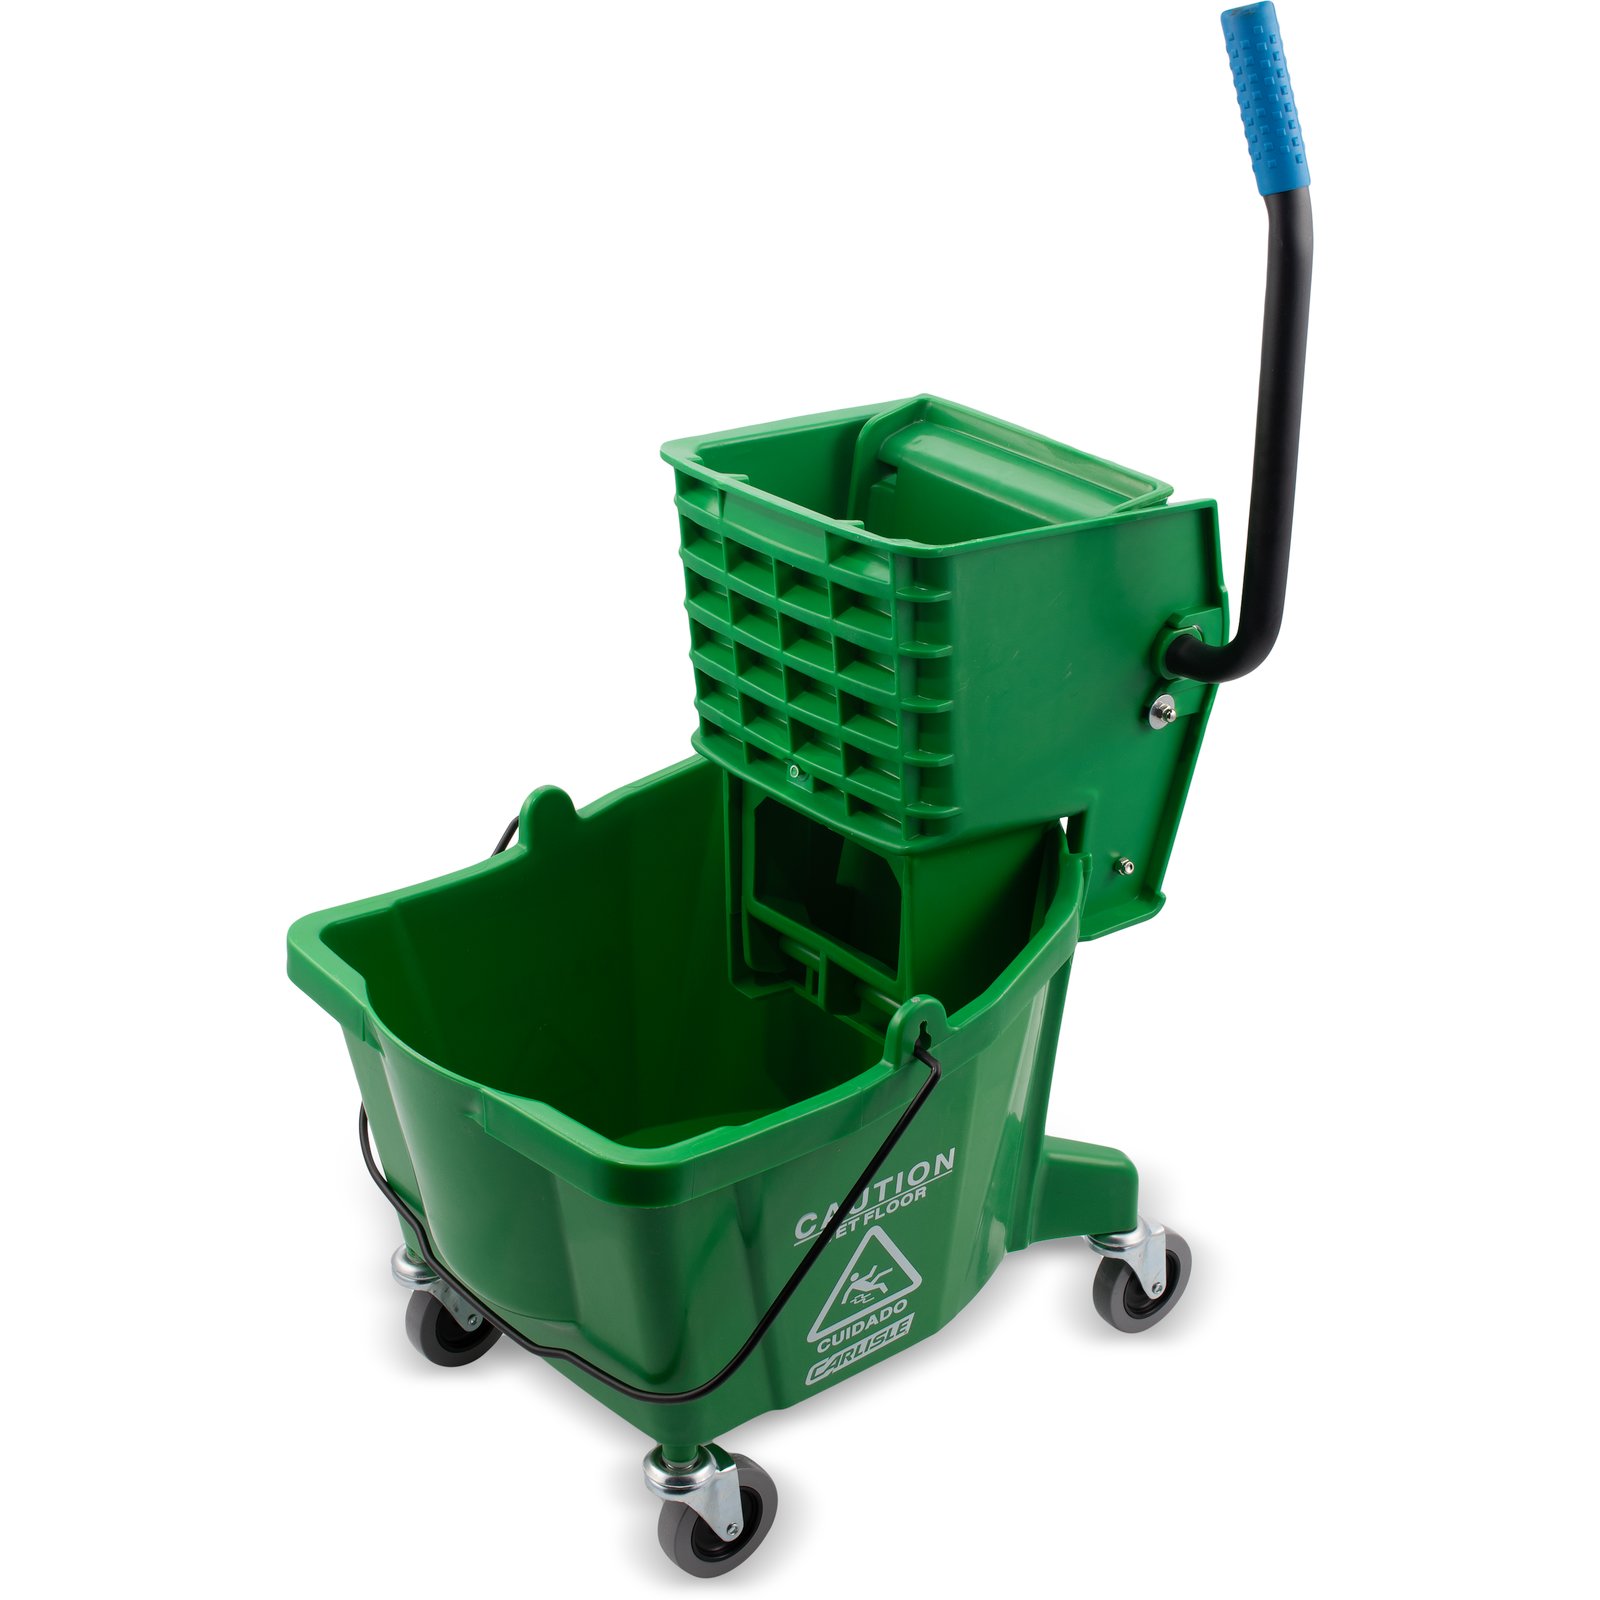 Small Mop & Bucket with Wringer - Mop and Bucket Combo